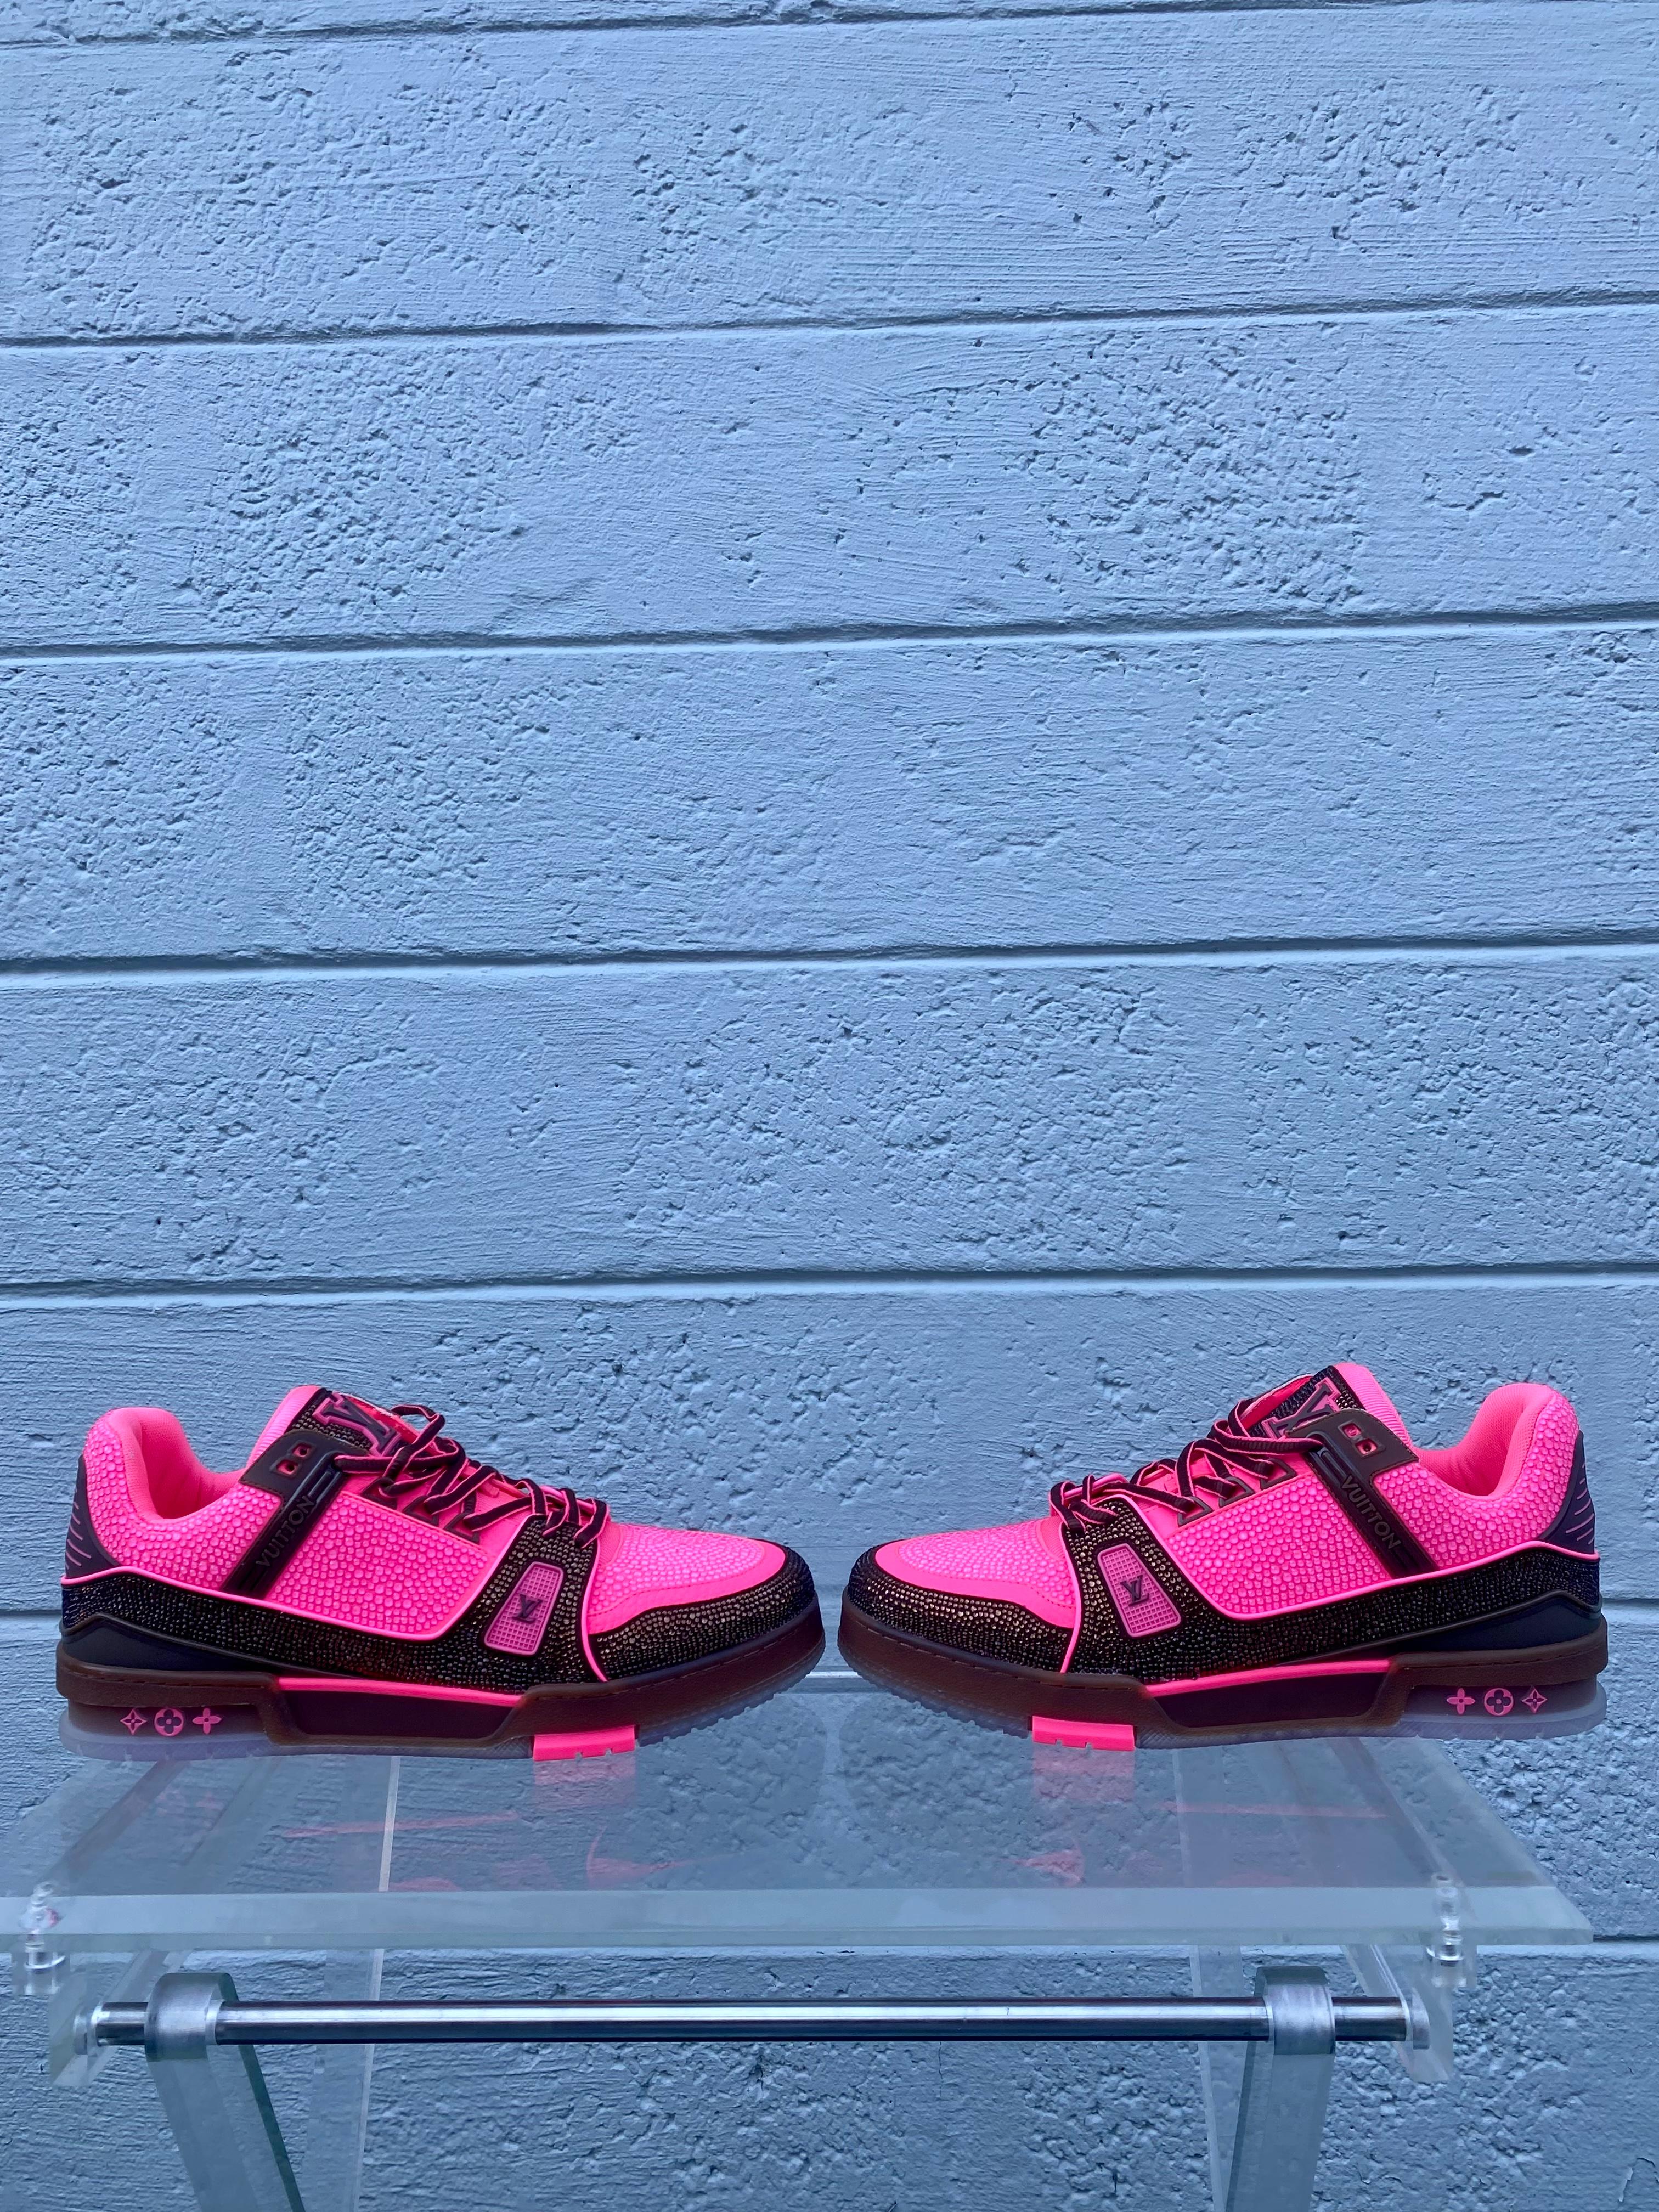 Men's New Rare Limited Edition Louis Vuitton Pink shoes For Sale